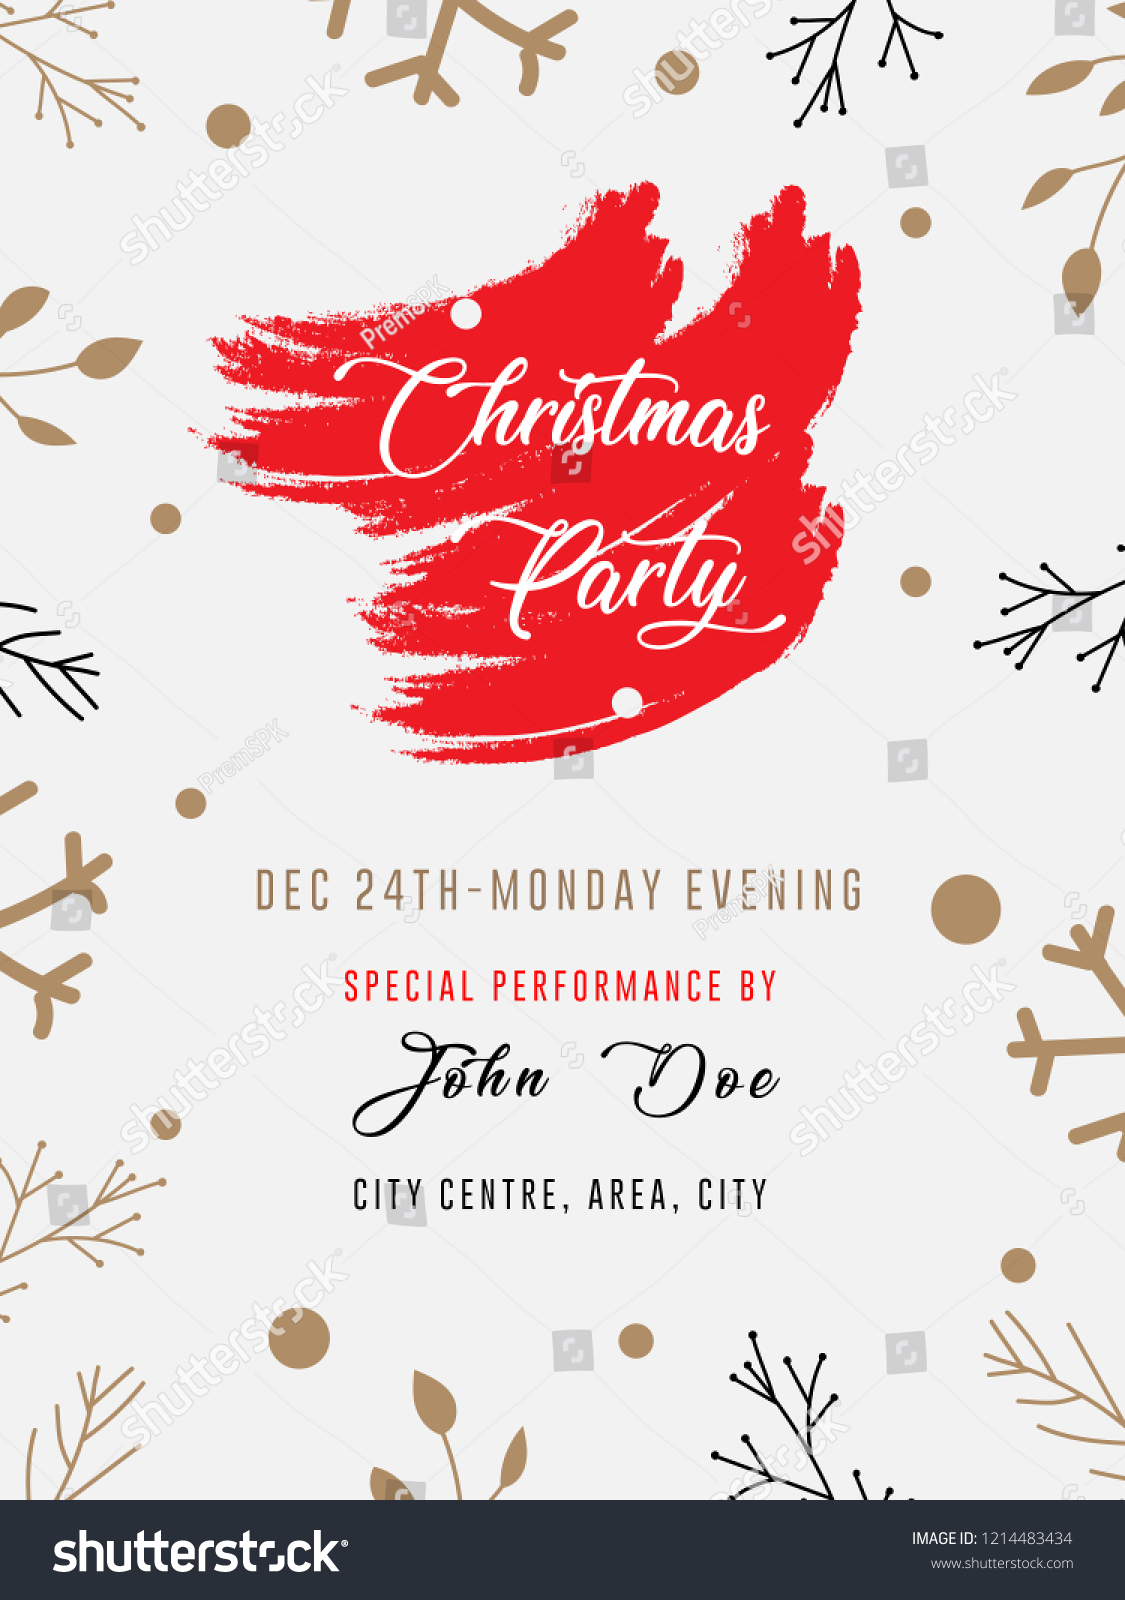 Red Color Theme Christmas Party Flyer Stock Vector (Royalty Free ...